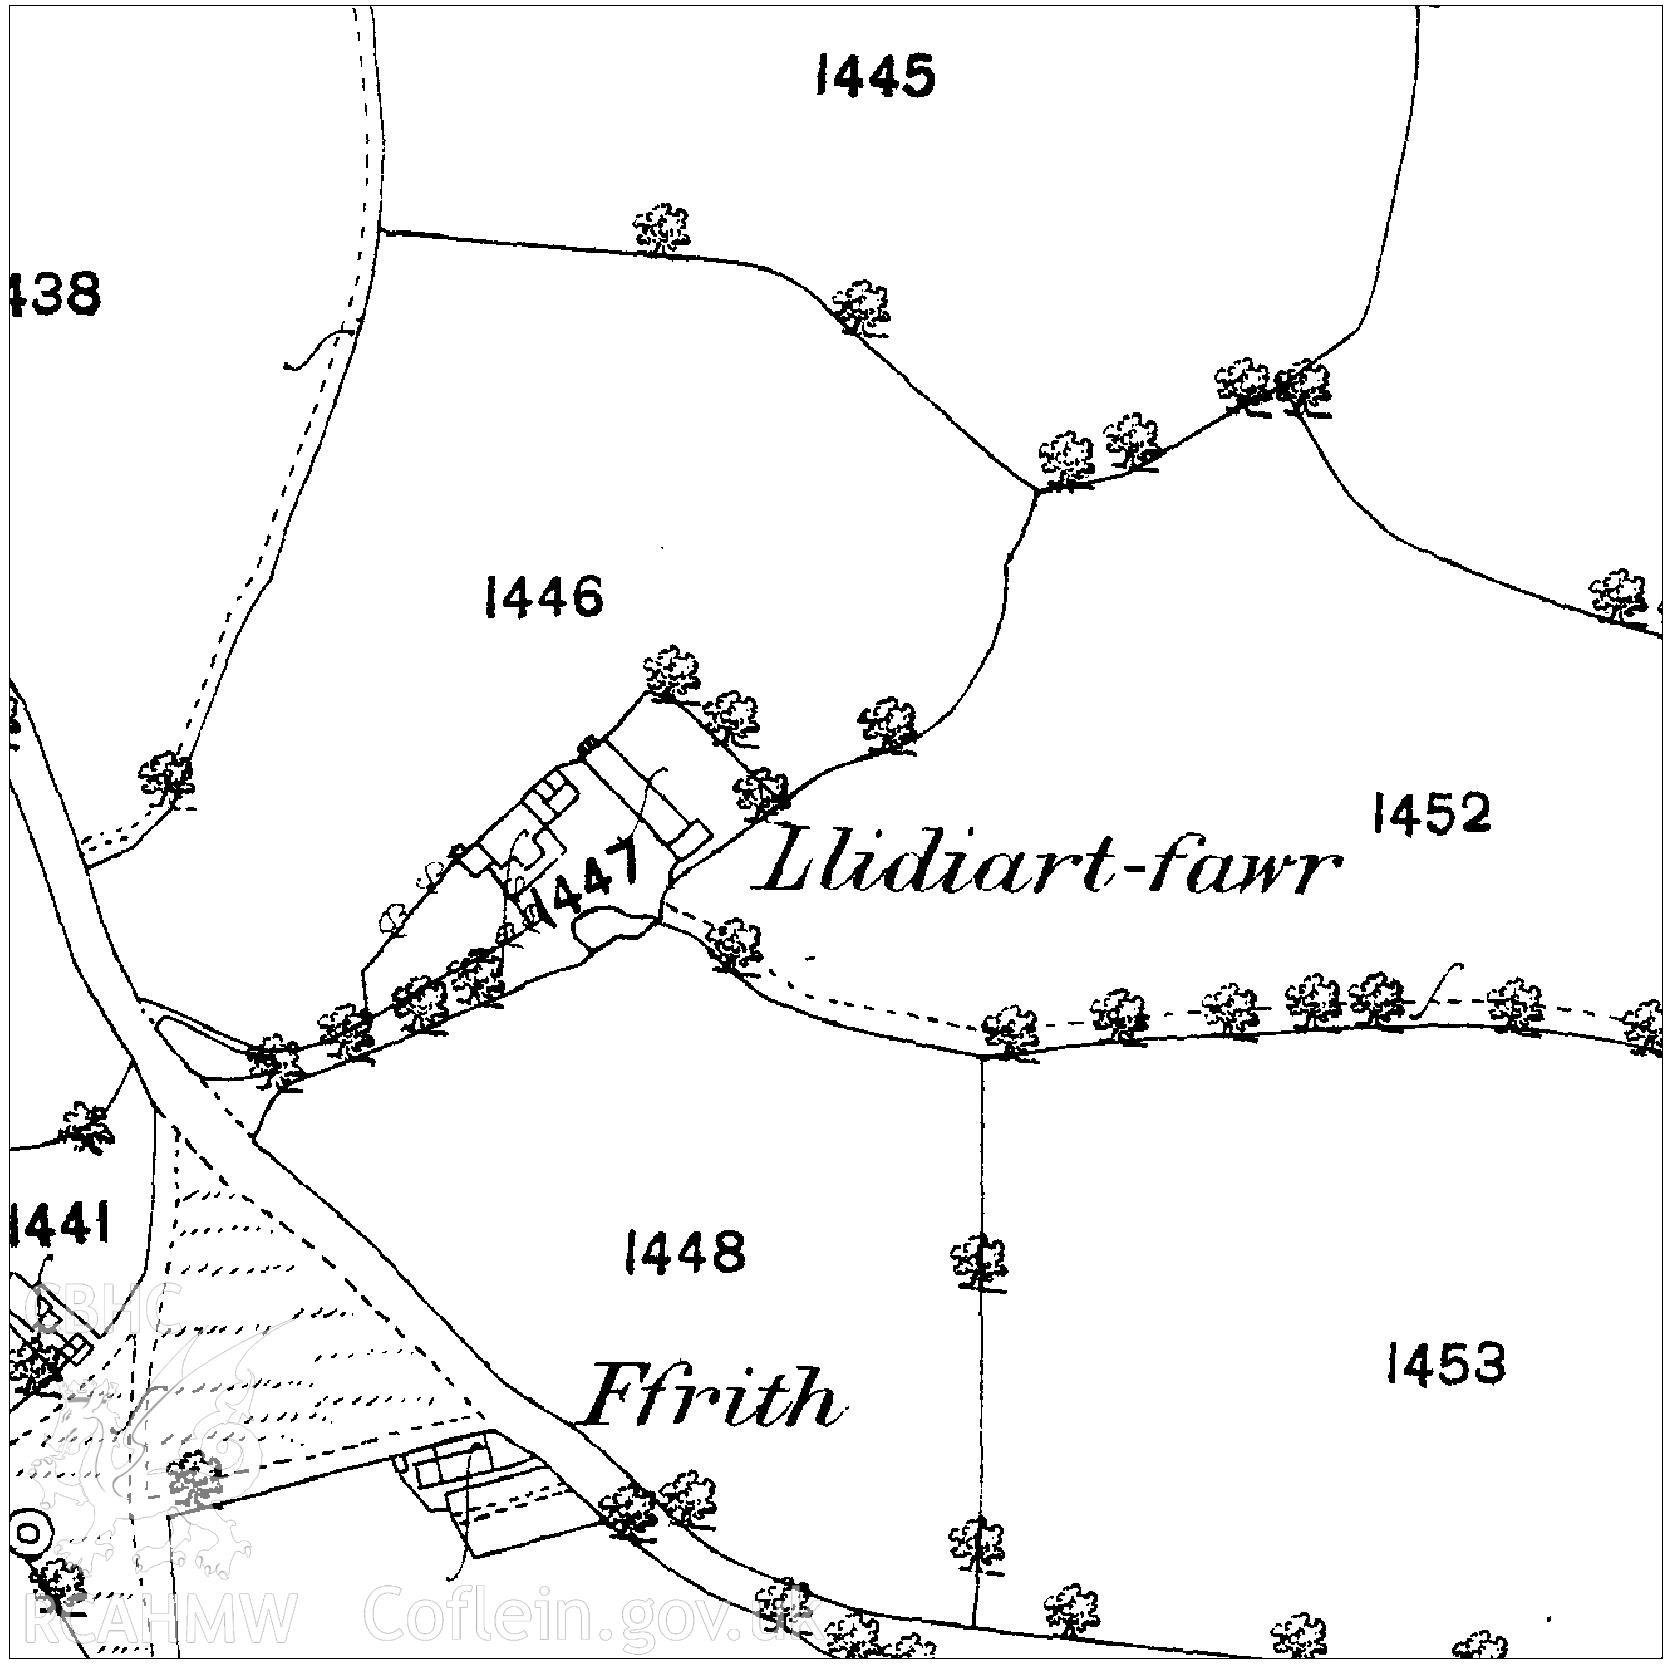 1879 map of area around Llidiart Fawr, Denbighshire. Used as report illustration for CPAT Project 2350: Llidiart Fawr, Pentrecelyn, Ruthin - Archaeological Building Survey, 2018. Report no. 1644.